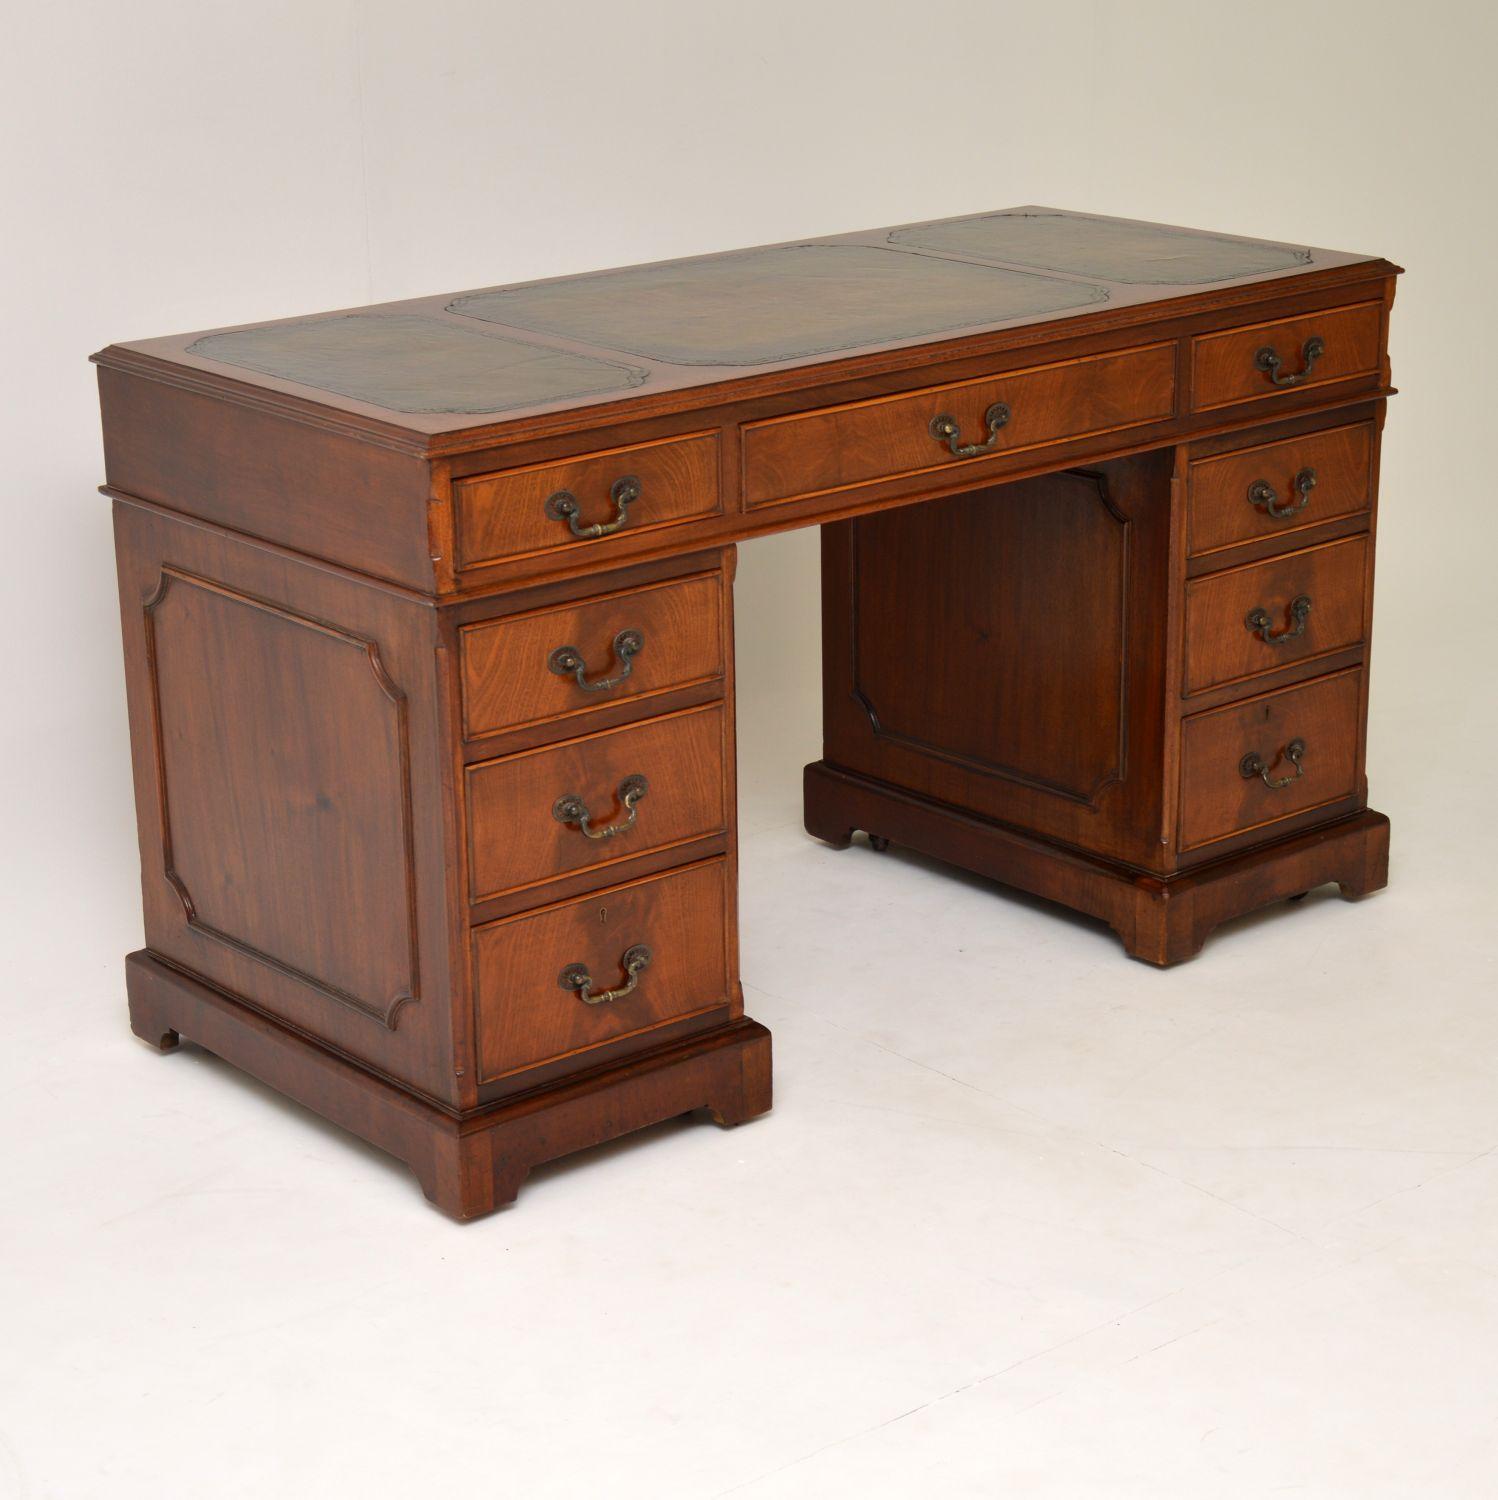 George III Antique Flame Mahogany Leather Top Pedestal Desk